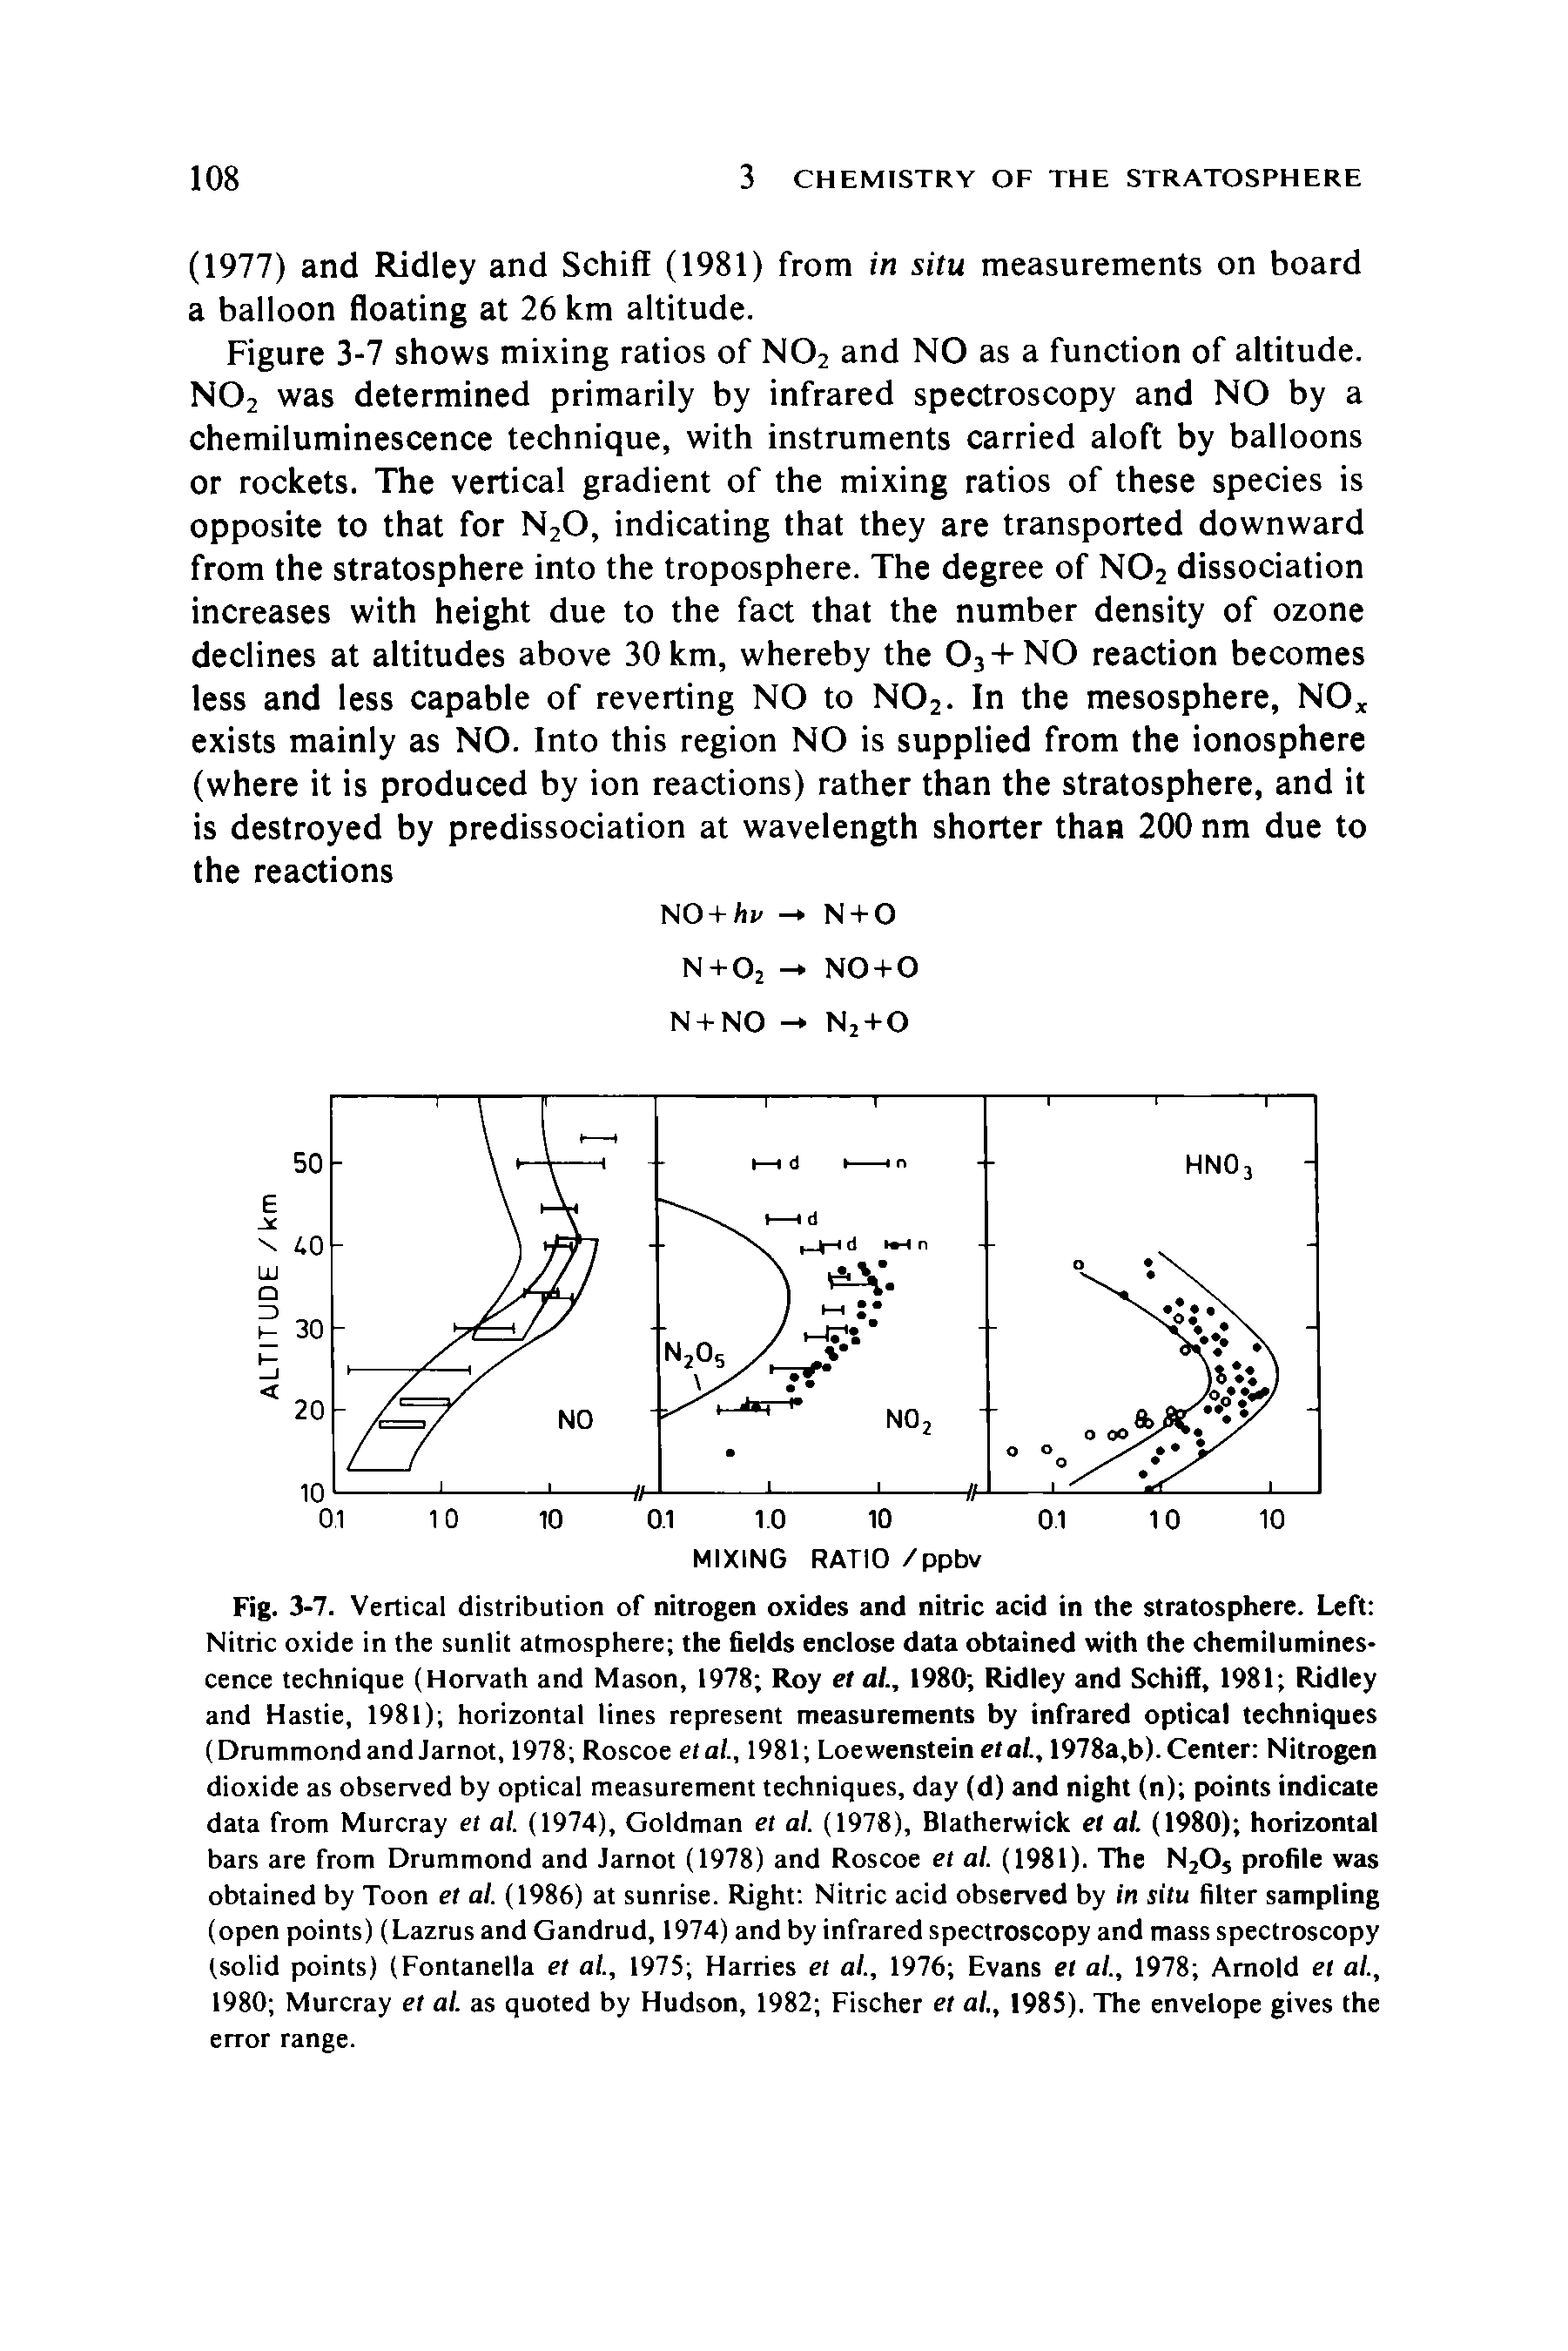 Fig. 3-7. Vertical distribution of nitrogen oxides and nitric acid in the stratosphere. Left Nitric oxide in the sunlit atmosphere the fields enclose data obtained with the chemiluminescence technique (Horvath and Mason, 1978 Roy et at, 1980 Ridley and Schiff, 1981 Ridley and Hastie, 1981) horizontal lines represent measurements by infrared optical techniques (Drummond and Jarnot, 1978 Roscoe etal., 1981 Loewenstein etal., 1978a,b). Center Nitrogen dioxide as observed by optical measurement techniques, day (d) and night (n) points indicate data from Murcray et al. (1974), Goldman et al. (1978), Blatherwick et at (1980) horizontal bars are from Drummond and Jarnot (1978) and Roscoe et al. (1981). The N205 profile was obtained by Toon et al. (1986) at sunrise. Right Nitric acid observed by in situ filter sampling (open points) (Lazrus and Gandrud, 1974) and by infrared spectroscopy and mass spectroscopy (solid points) (Fontanella et at, 1975 Harries et al., 1976 Evans et al., 1978 Arnold et al., 1980 Murcray et al. as quoted by Hudson, 1982 Fischer et at, 1985). The envelope gives the error range.